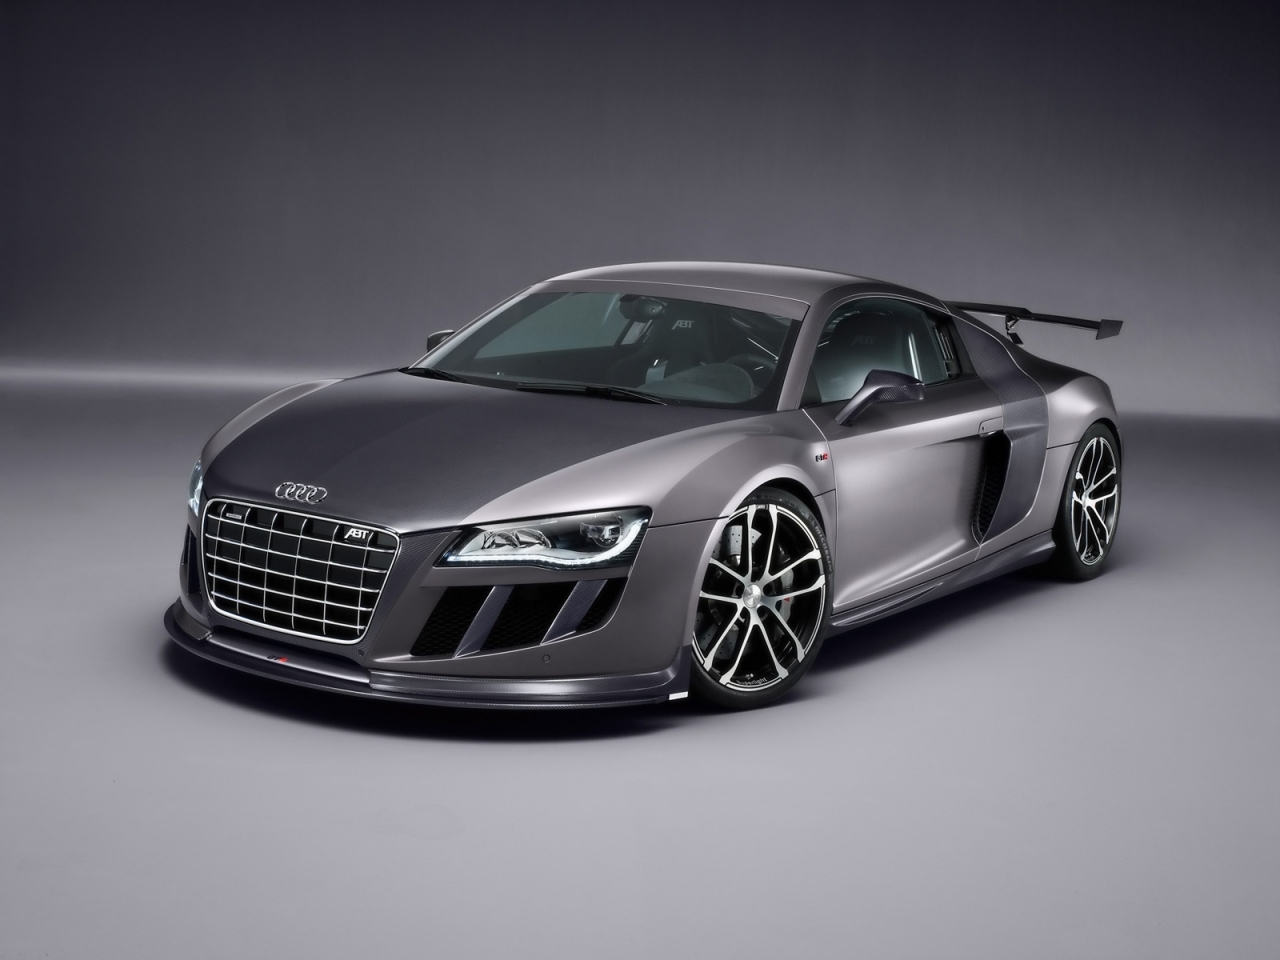 Abt Audi R8 GT-R 2010 for 1280 x 960 resolution